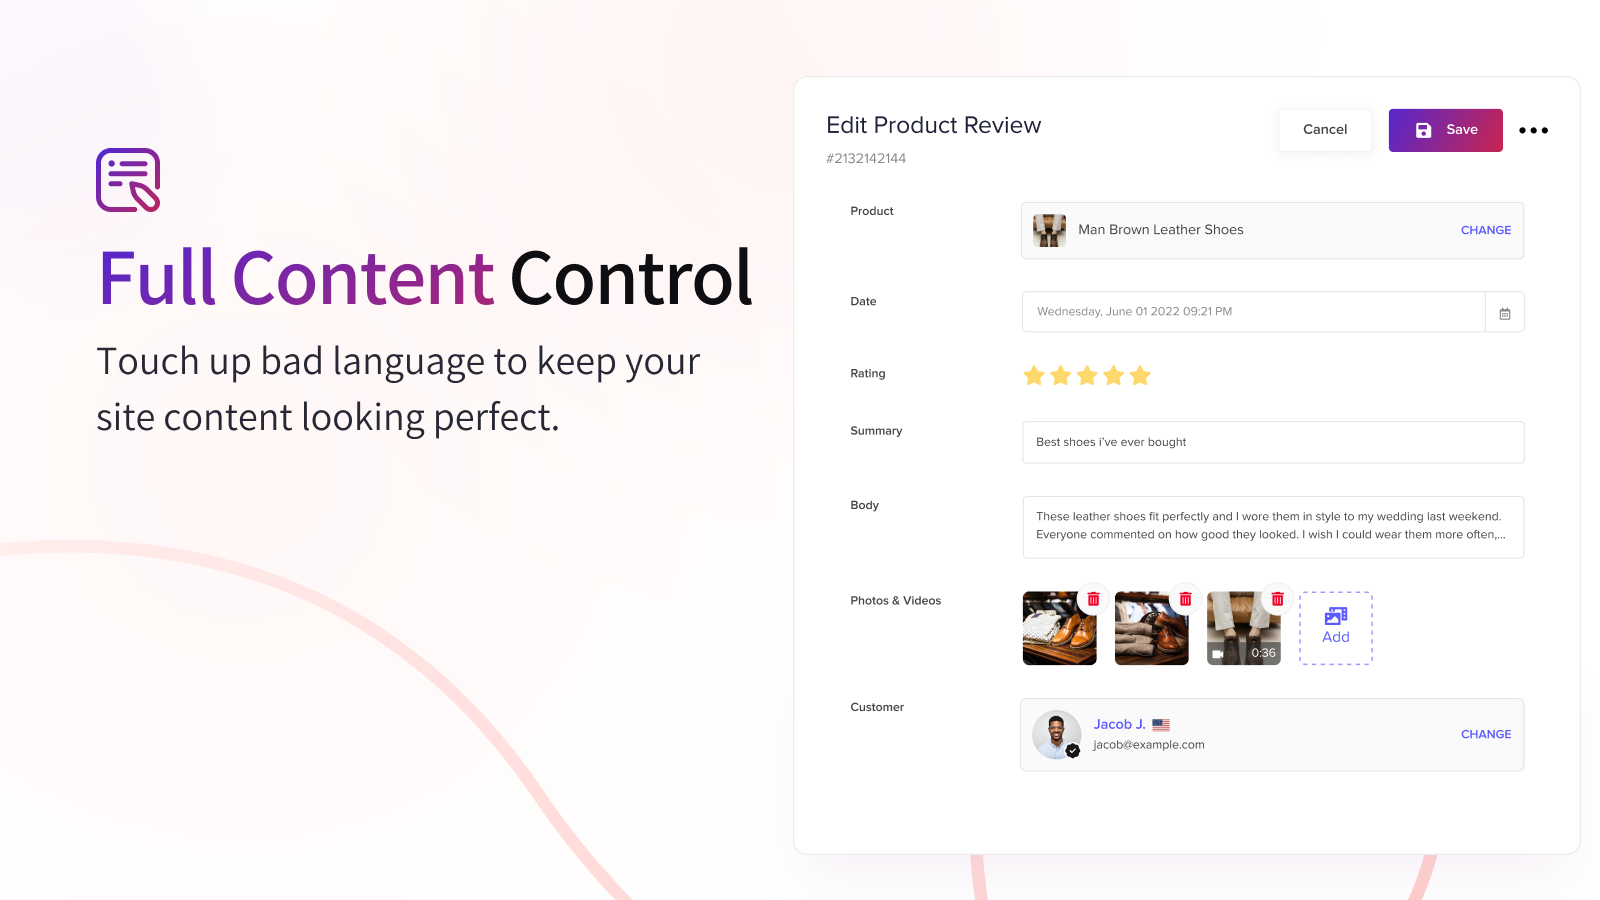 Clean & curate customer-submitted reviews, photos and videos.